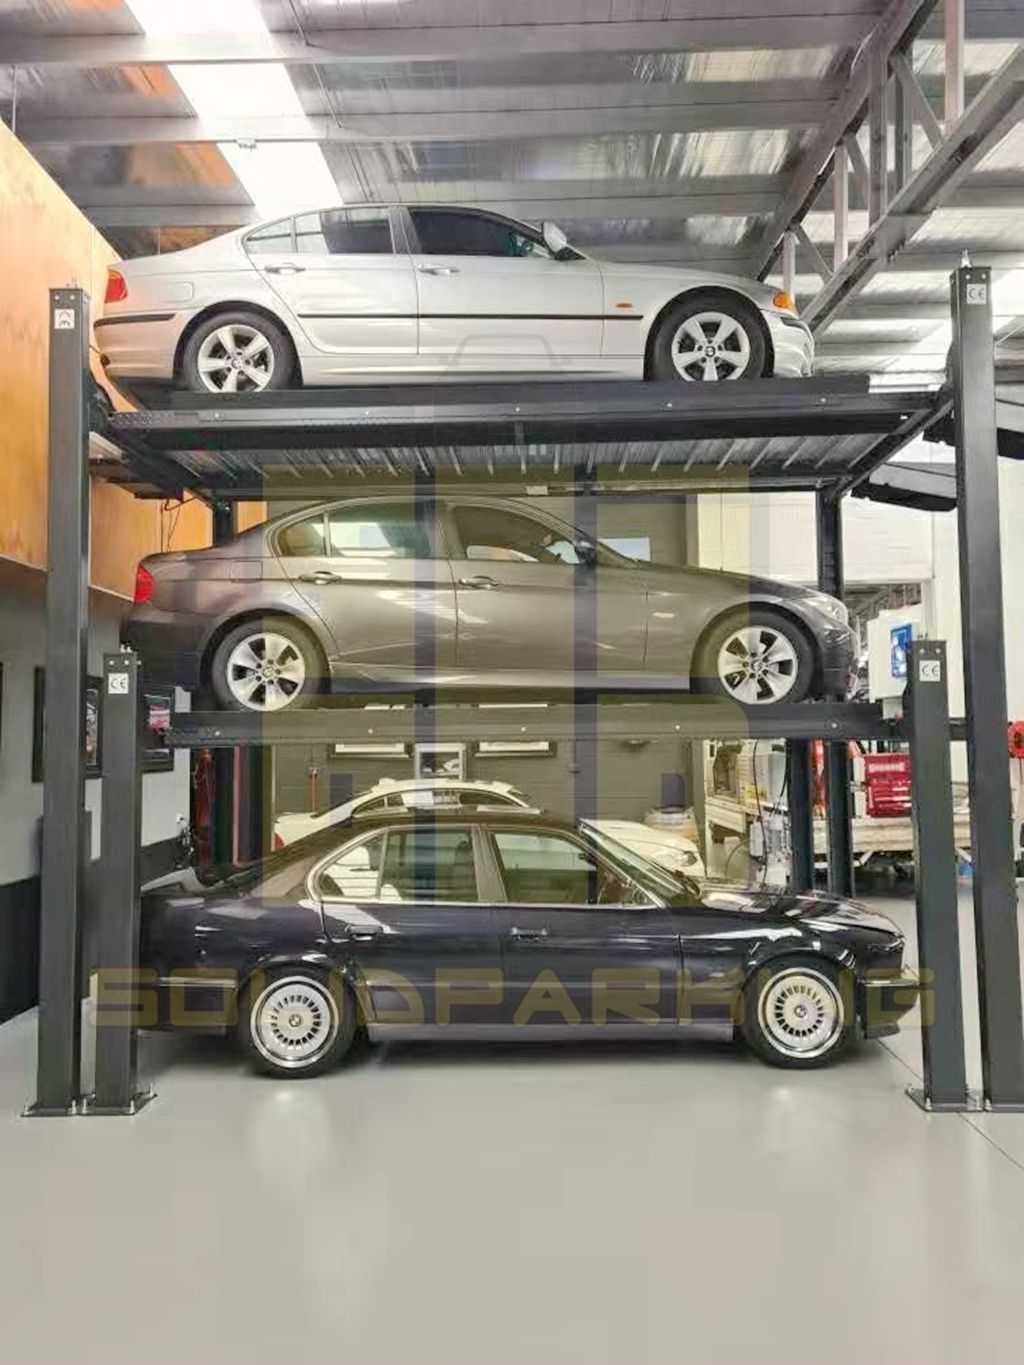 Two Post Parking Lift - Car Storage Lift, Automated Parking System & Car  Elevator - SolidParking